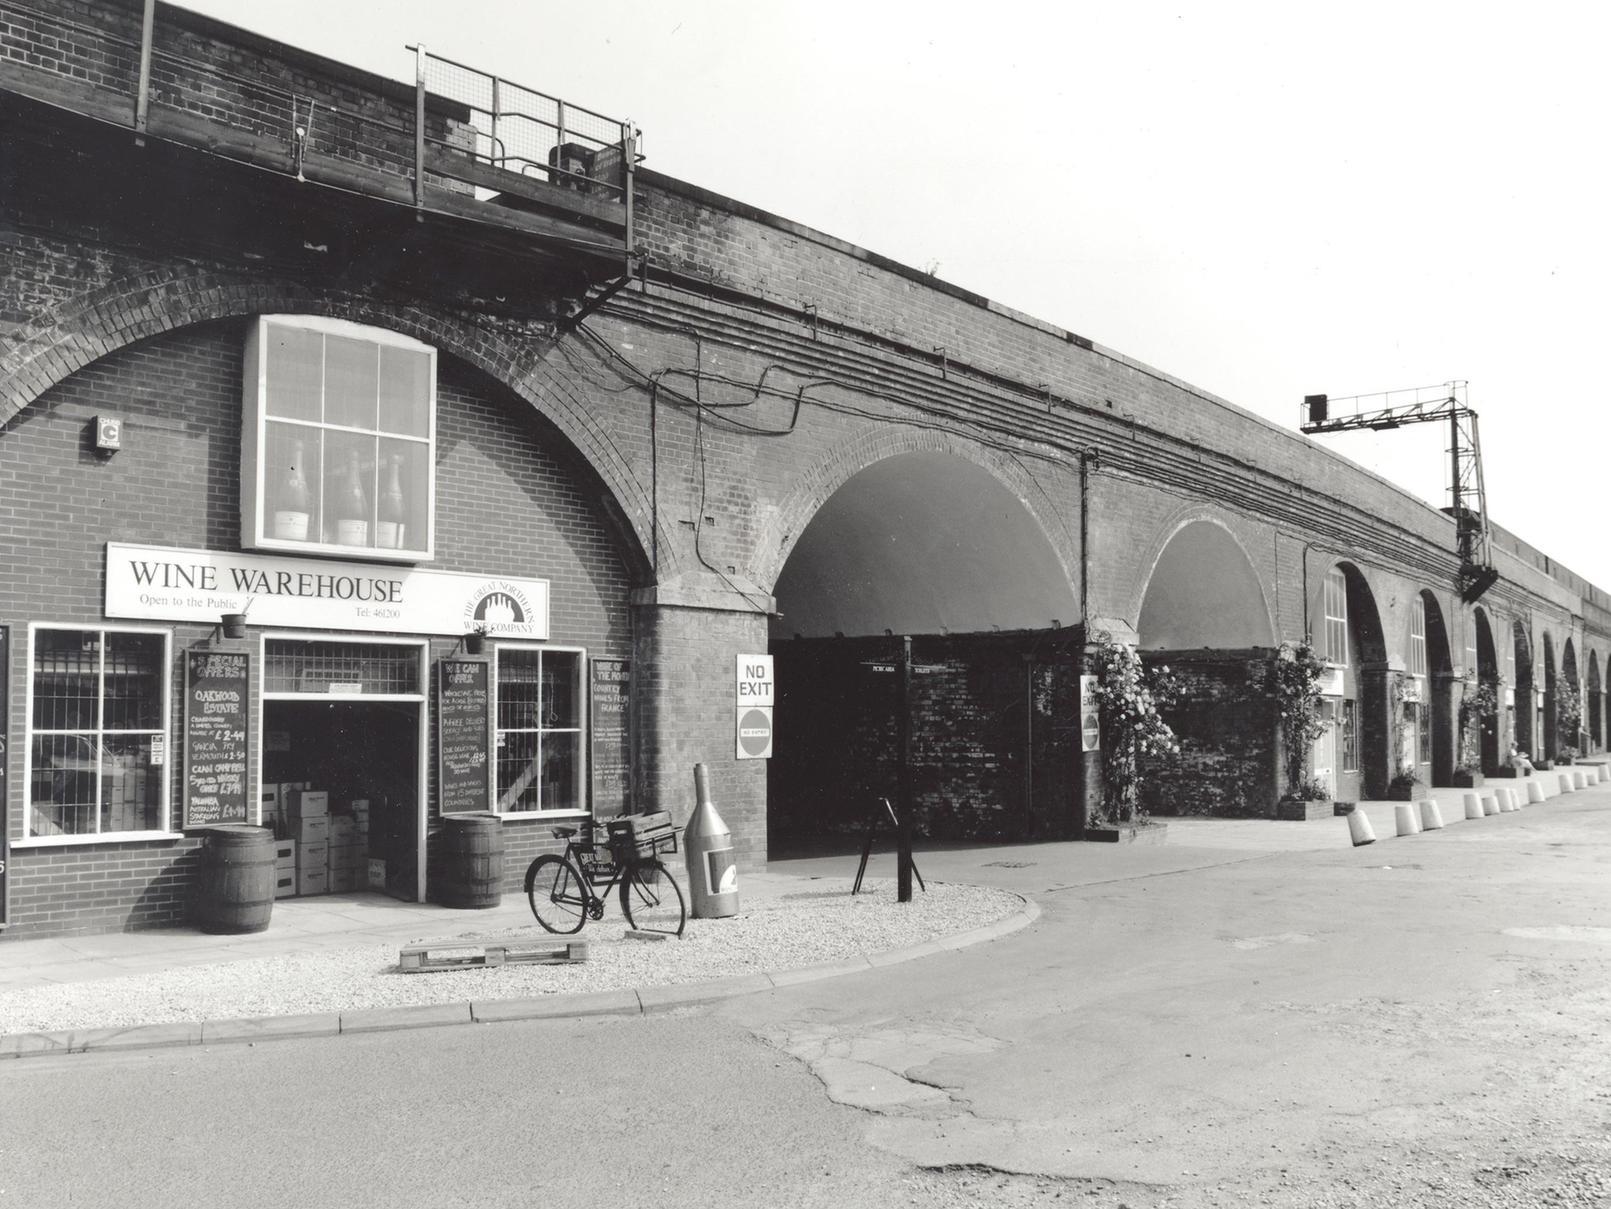 Did you visit the Wine Warehouse at the Dark Arches back in the day?